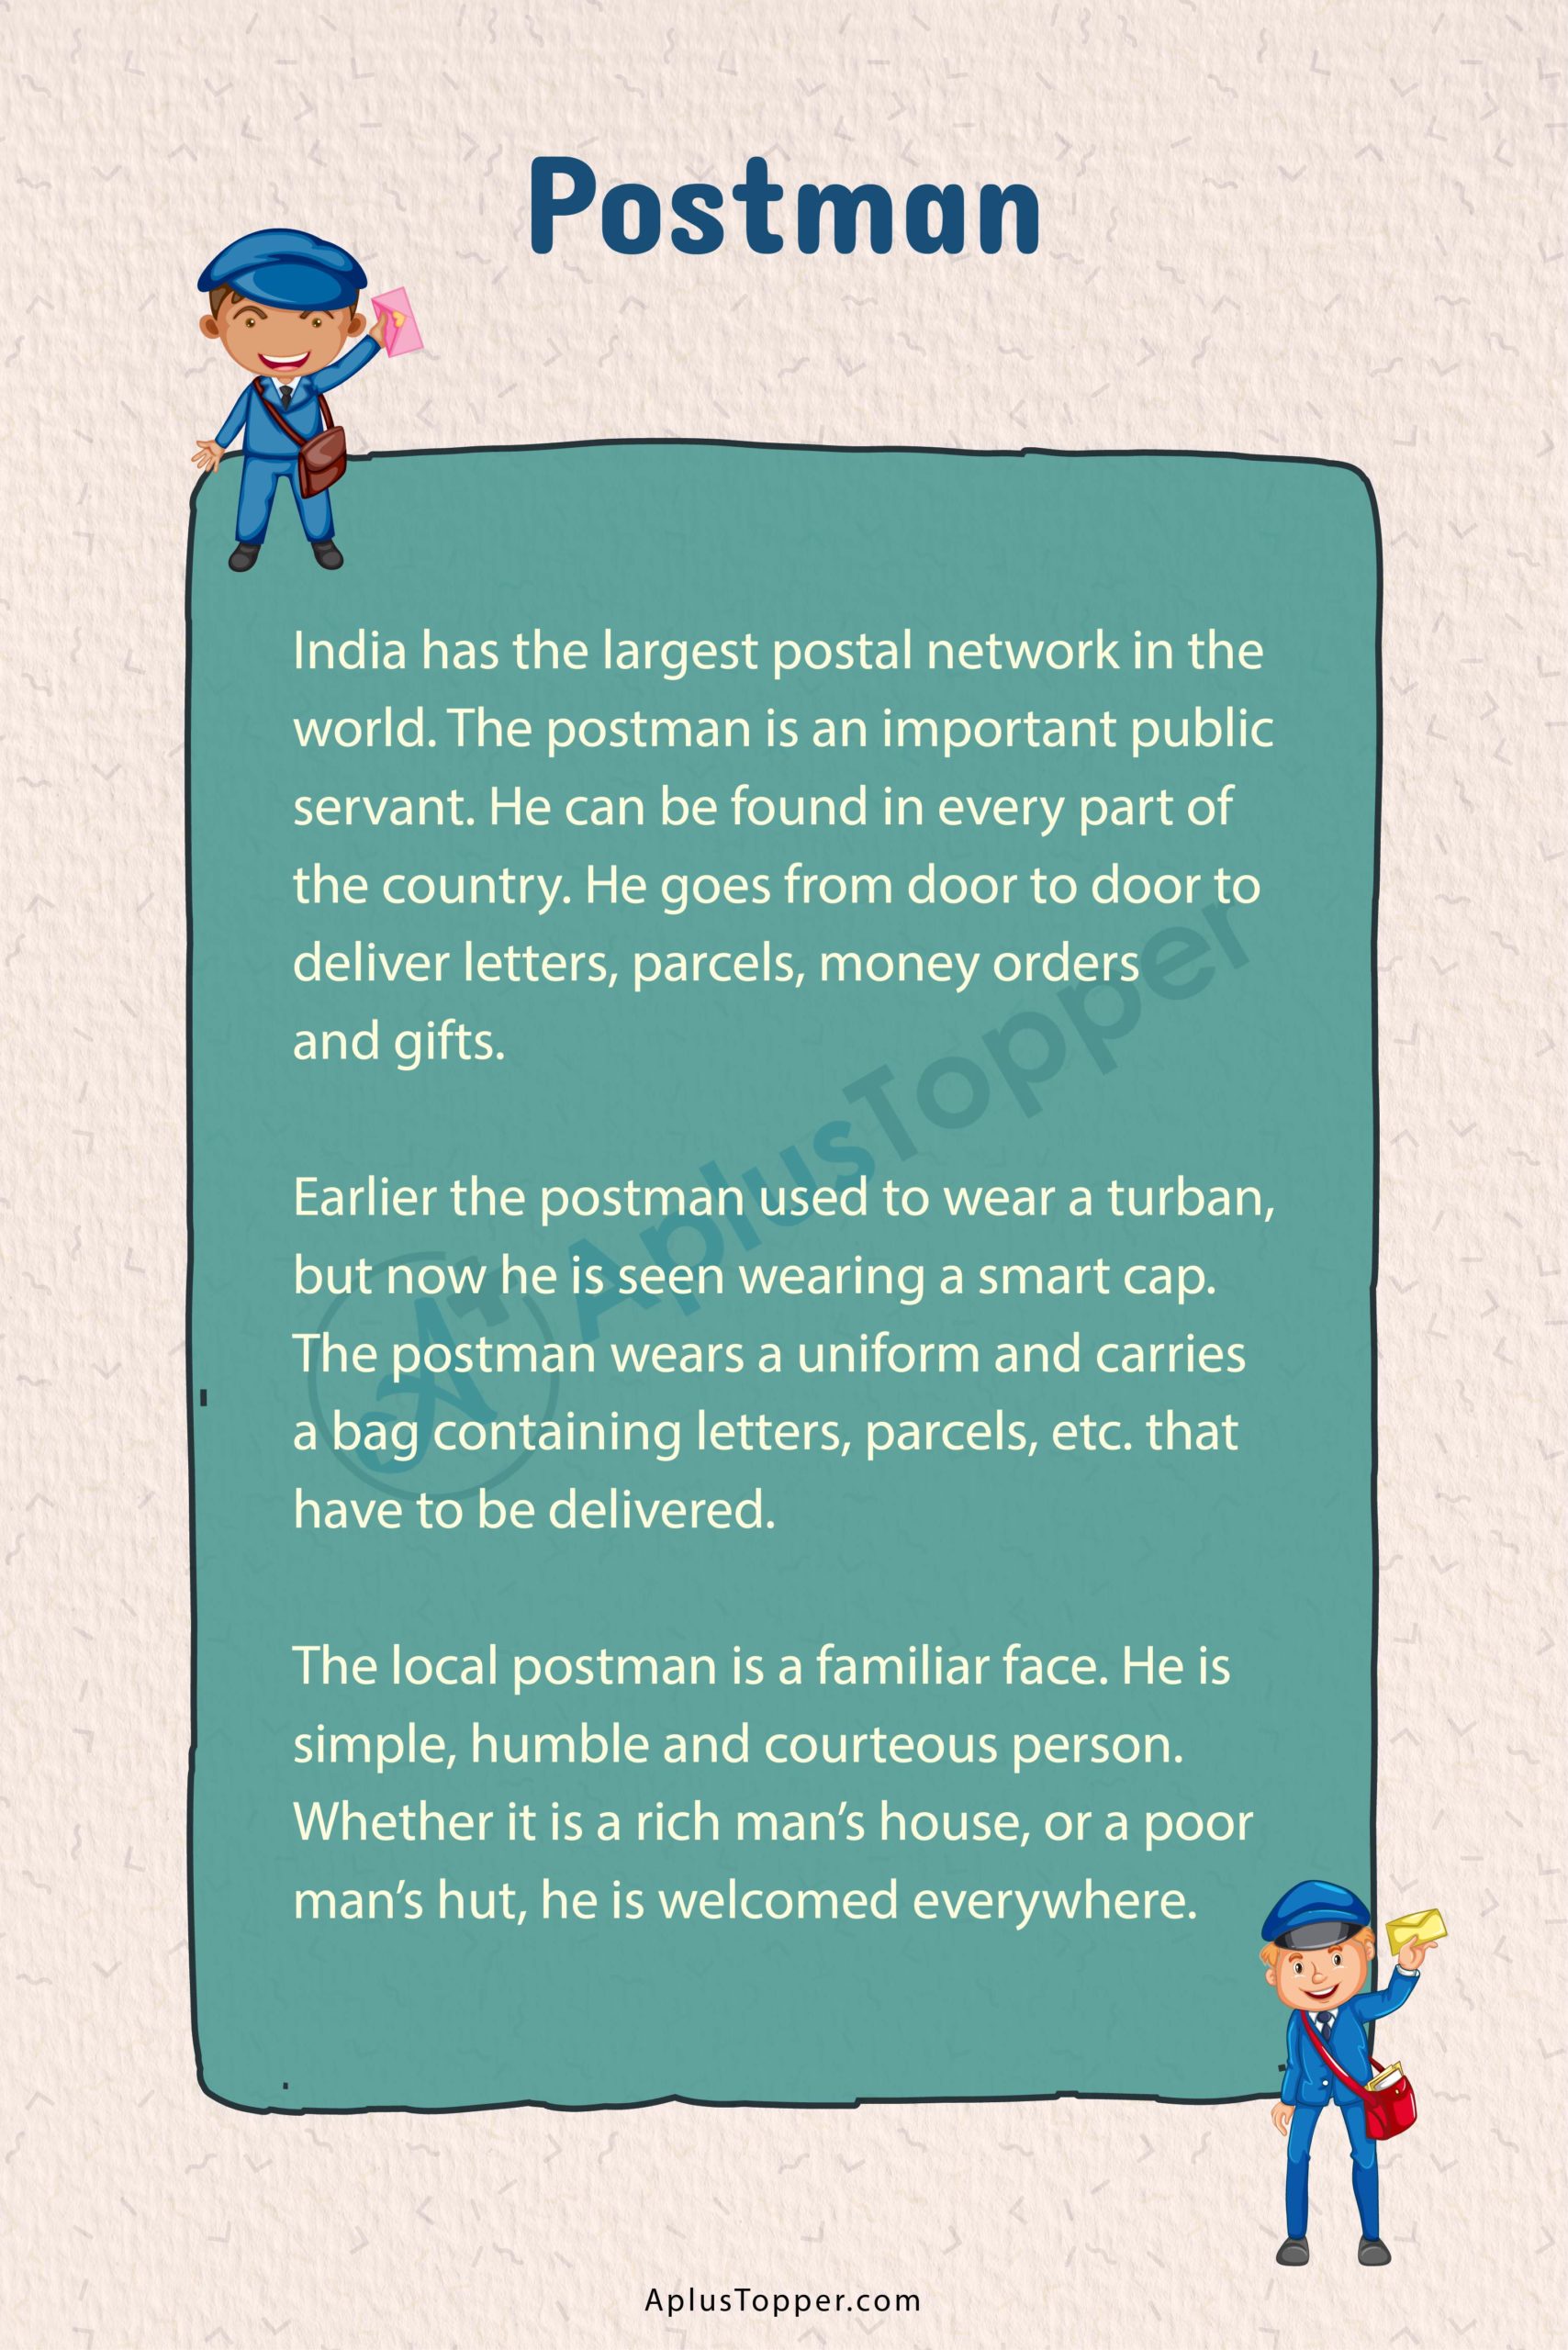 the postman essay for class 8